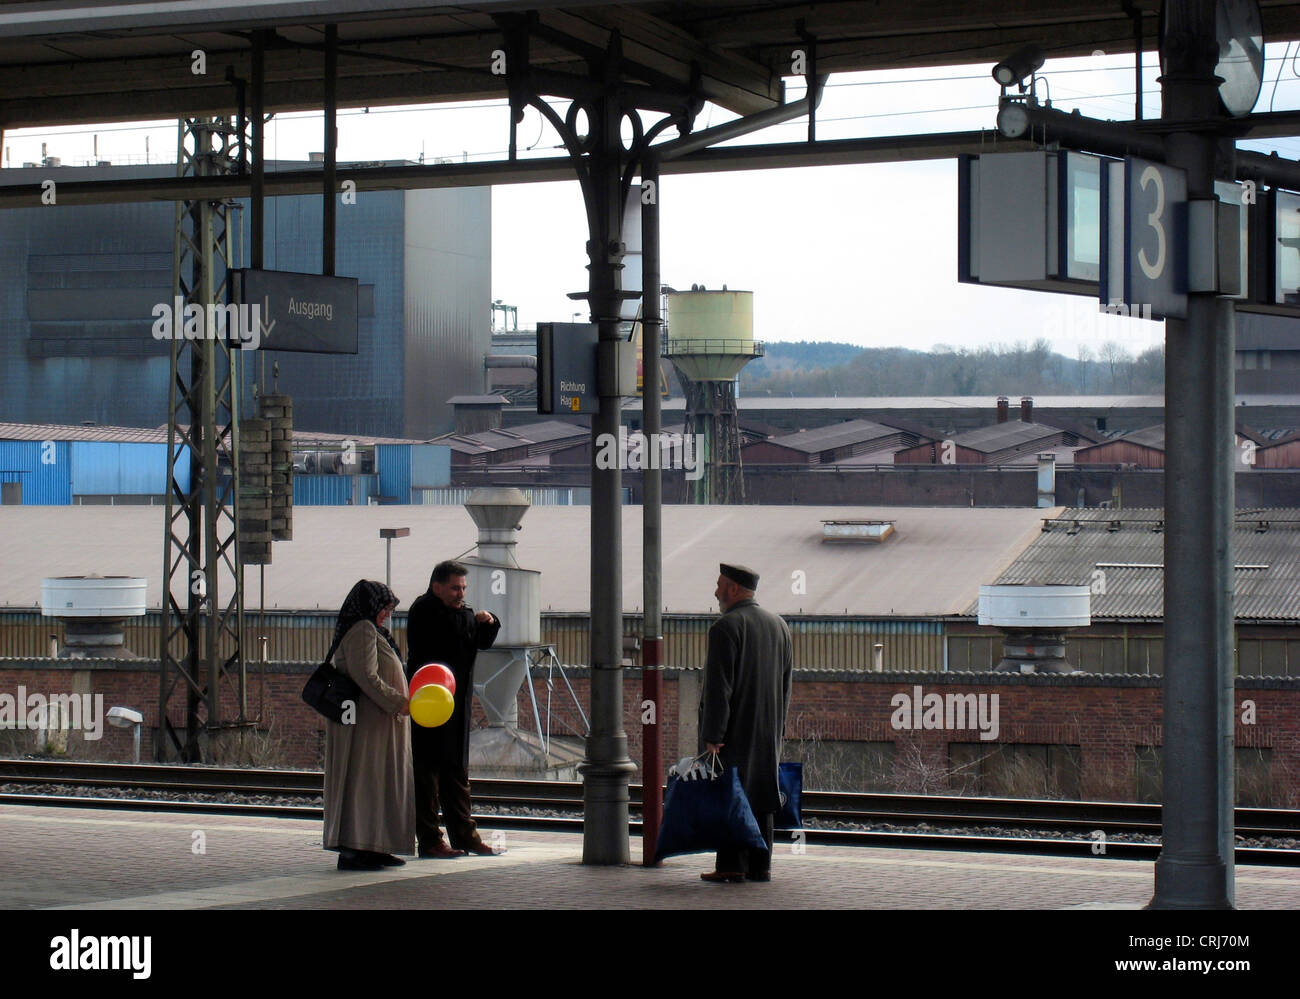 three Muslims at main station, steelwork in the background, Germany, North Rhine-Westphalia, Ruhr Area, Witten Stock Photo